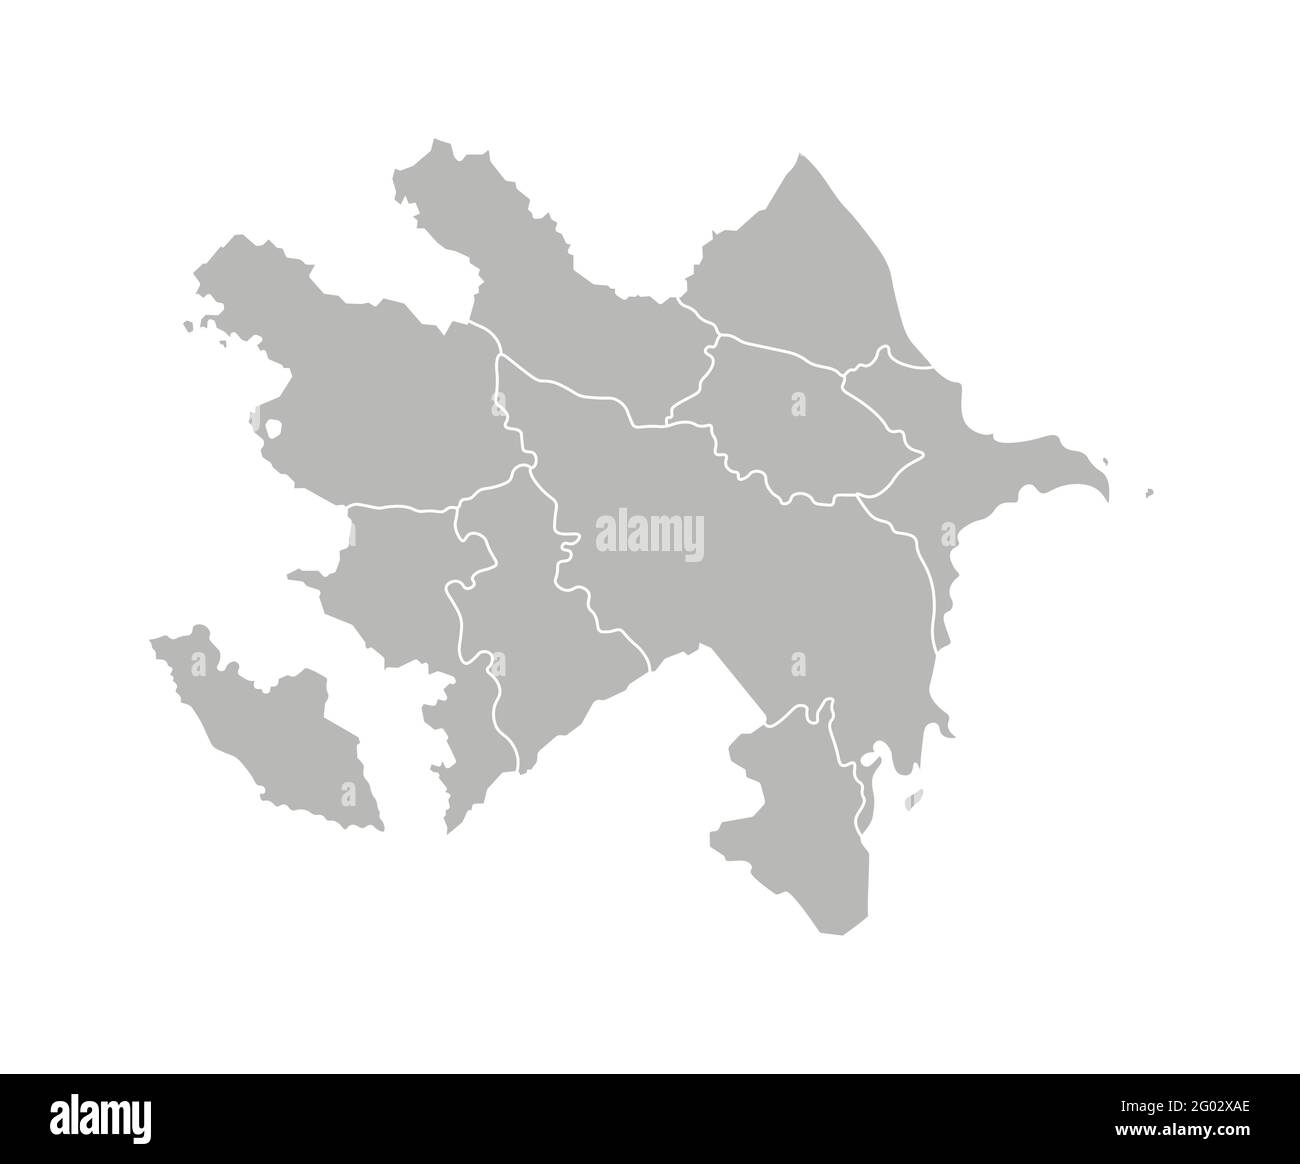 Vector isolated illustration of simplified administrative map of Azerbaijan. Borders of the provinces (regions). Grey silhouettes. White outline. Stock Vector